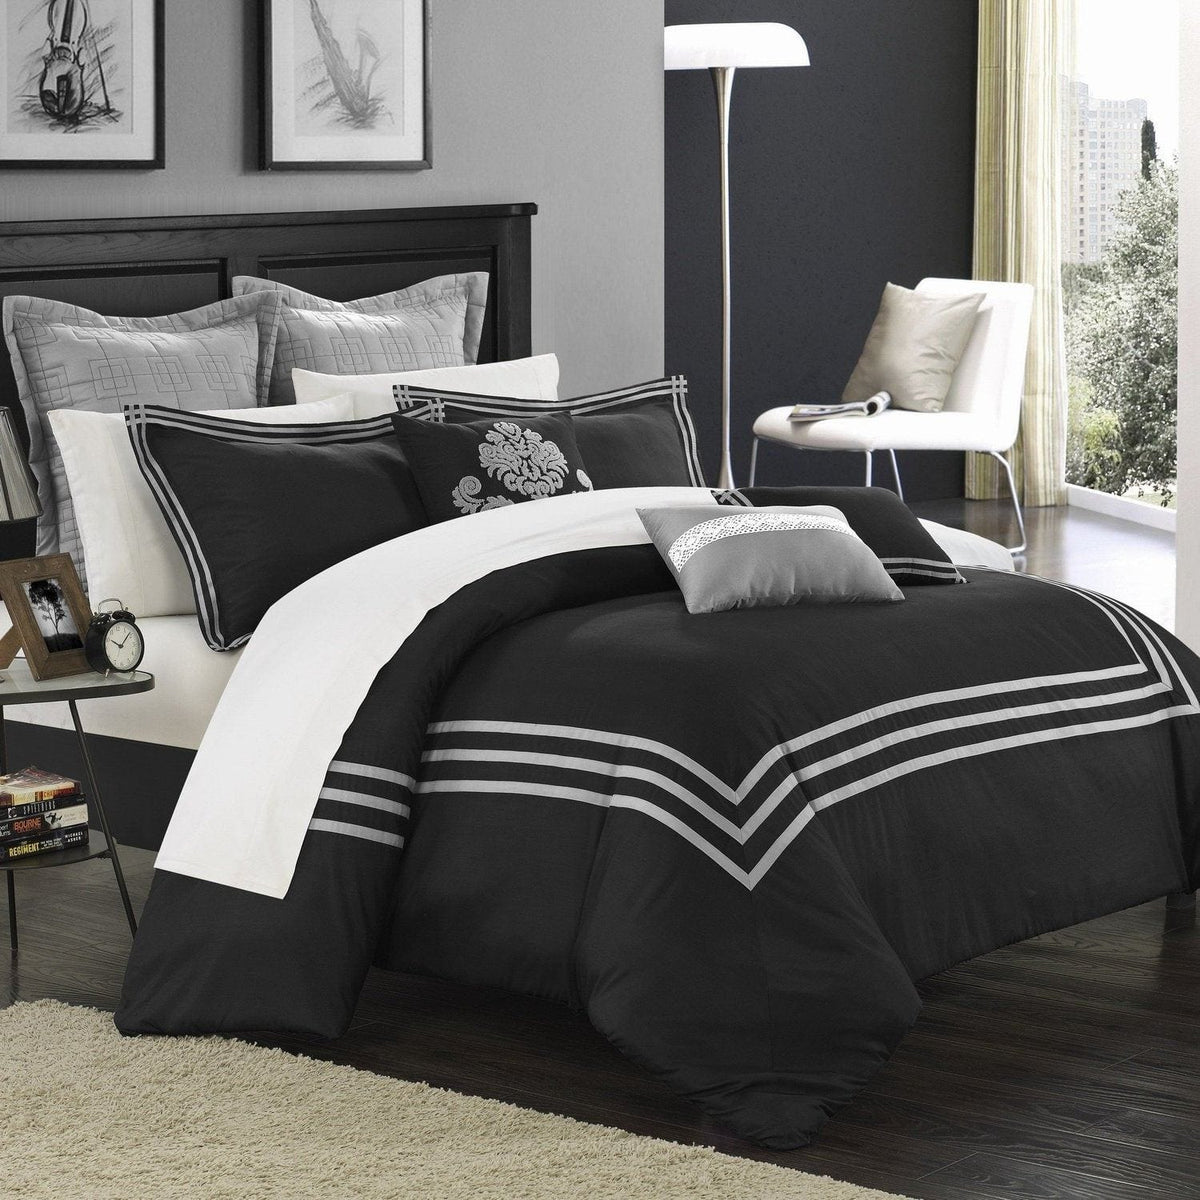 Chic Home Cosmo 8 Piece Hotel Comforter Set 